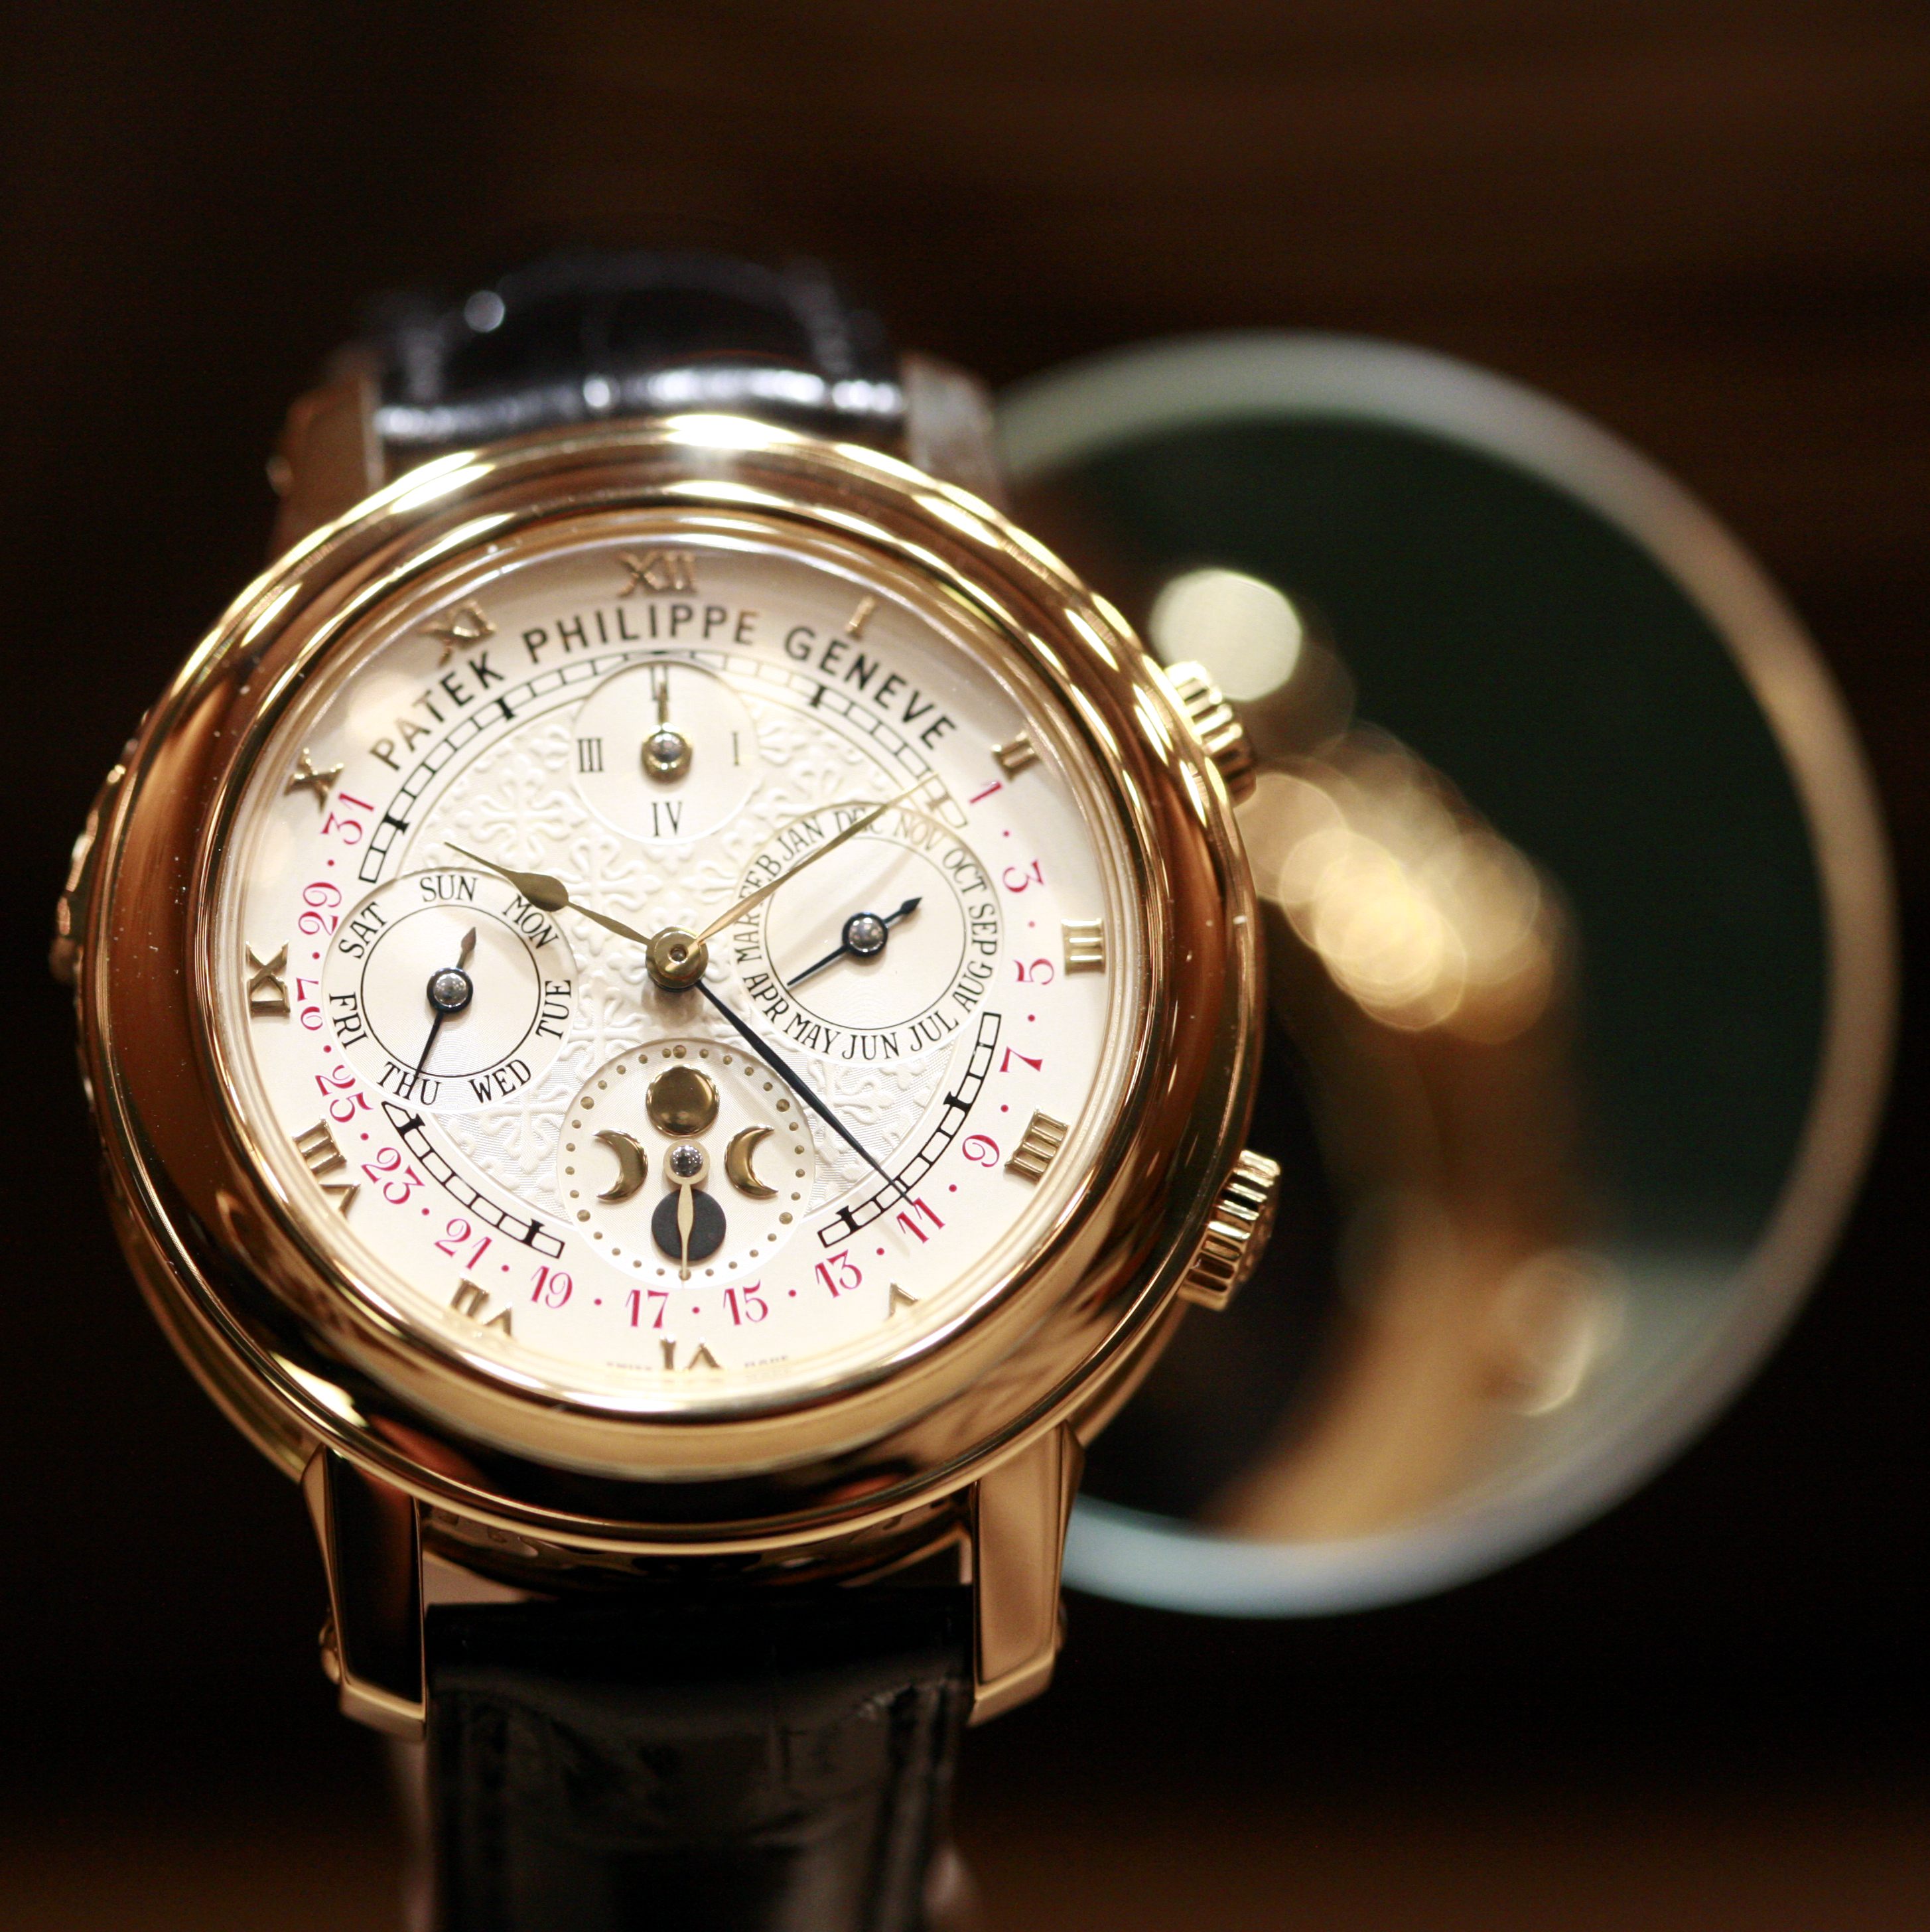 A Treasured Heirloom: Recommendations for Acquiring the Riches of Watchmaking